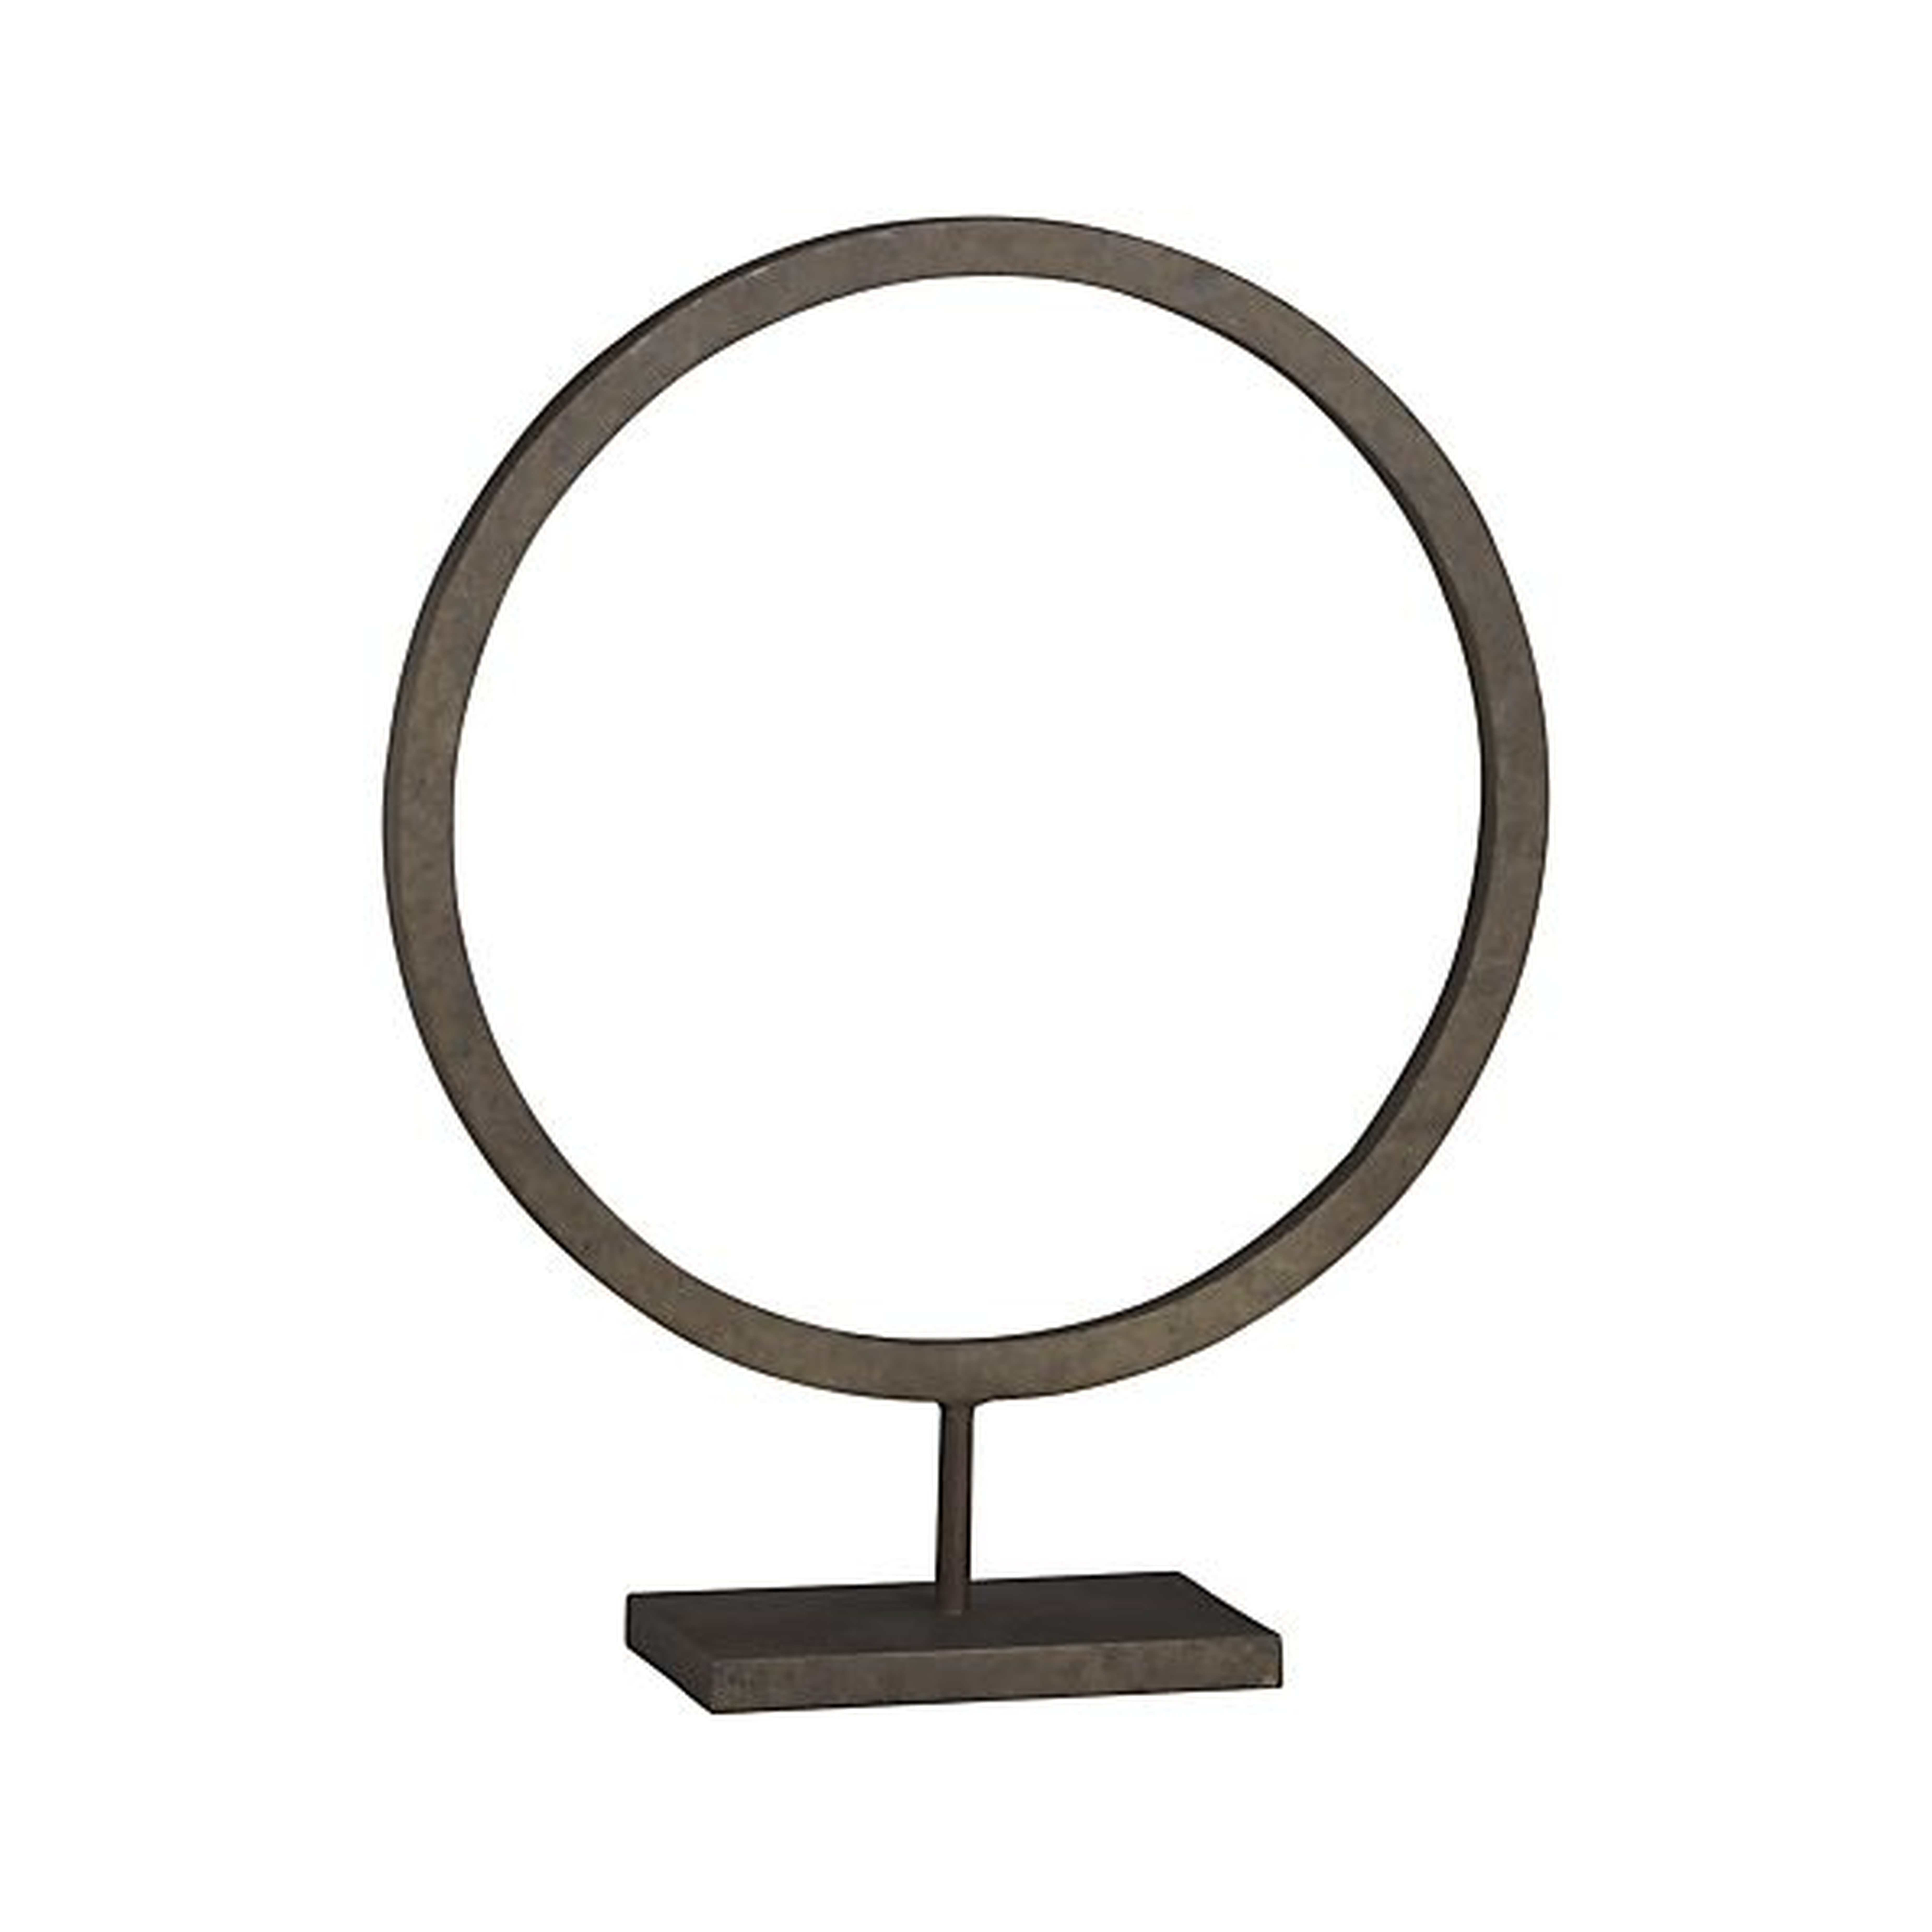 Circlet Stand - Small - Crate and Barrel